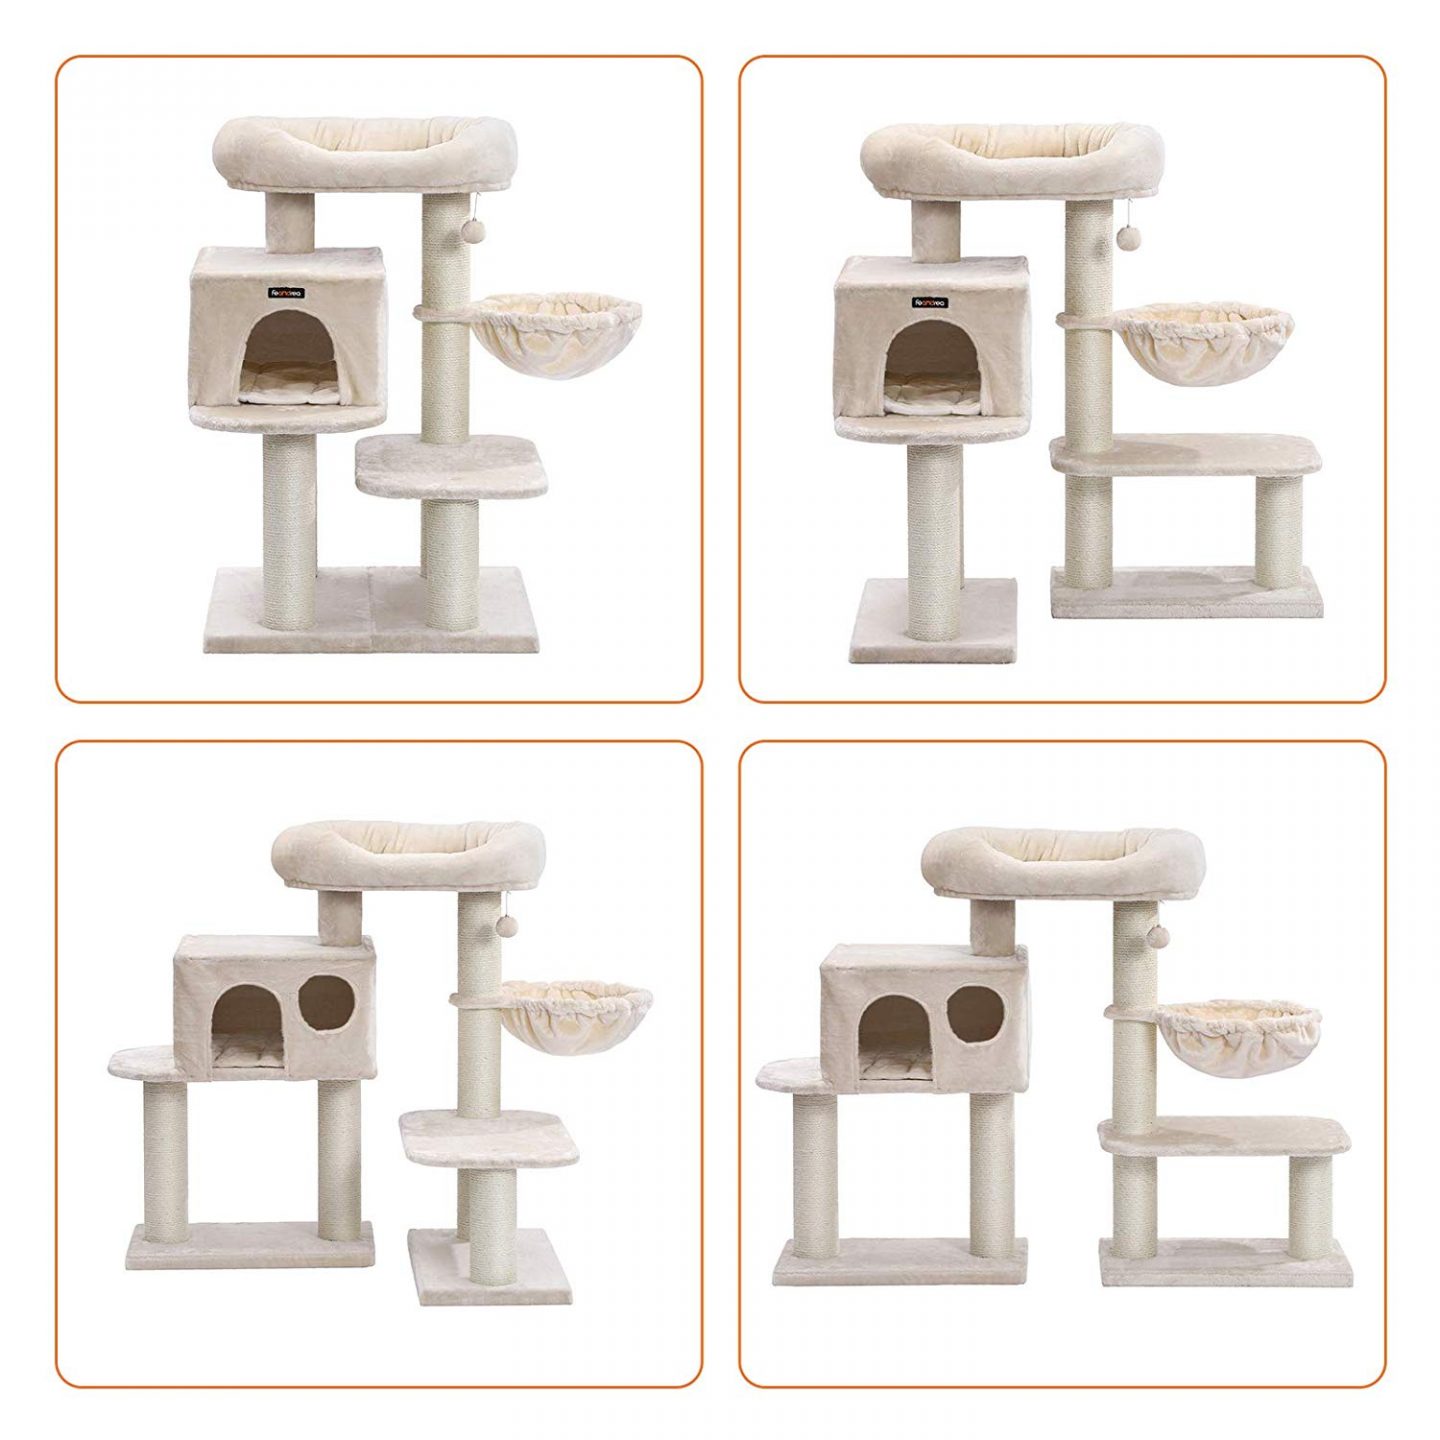 Here are the four main configurations that you can set this customizable cat tree up in.